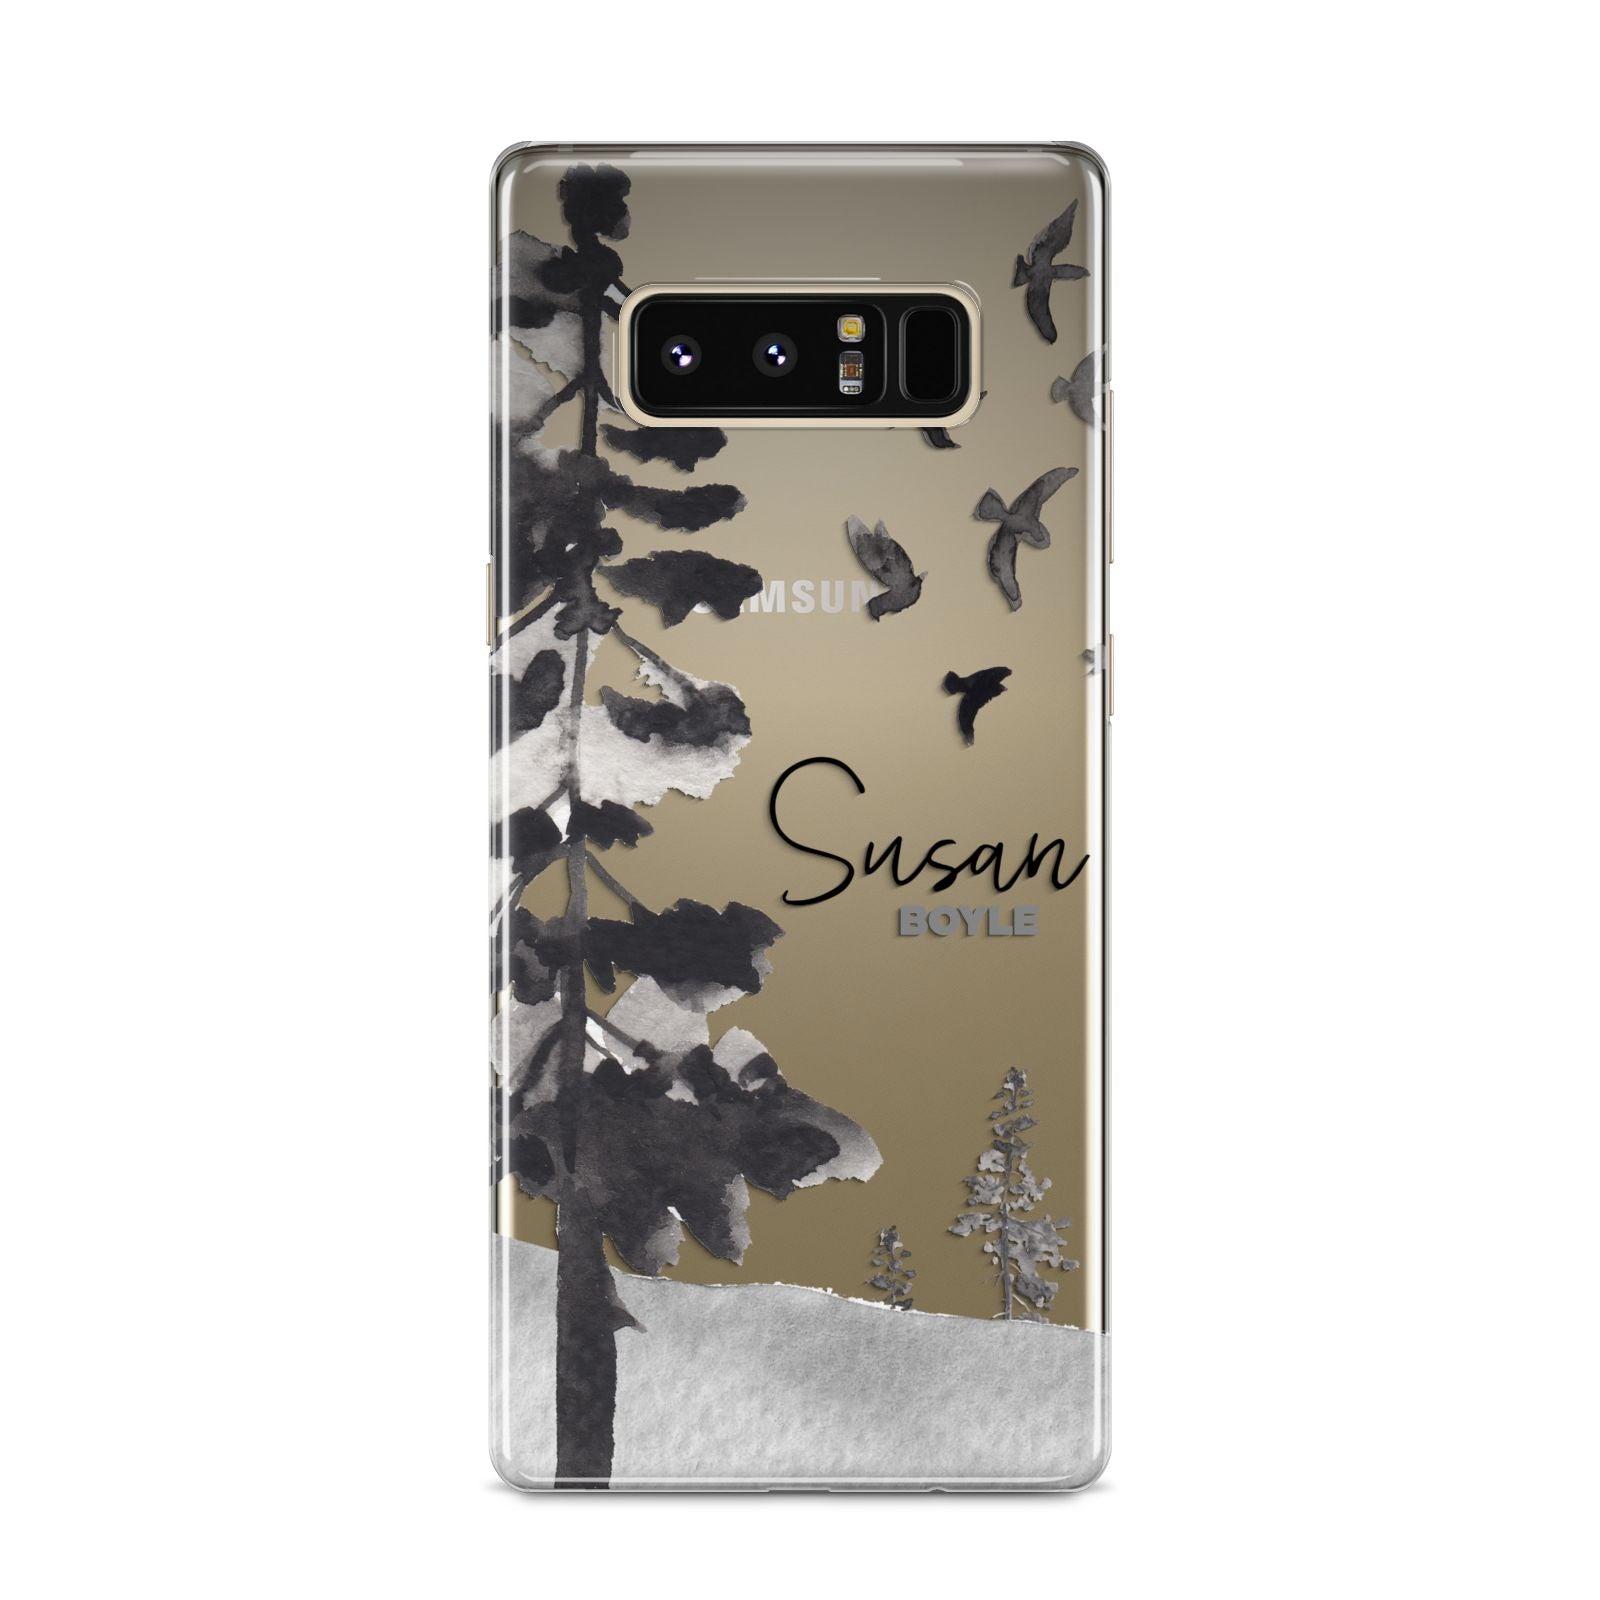 Personalised Monochrome Forest Samsung Galaxy S8 Case